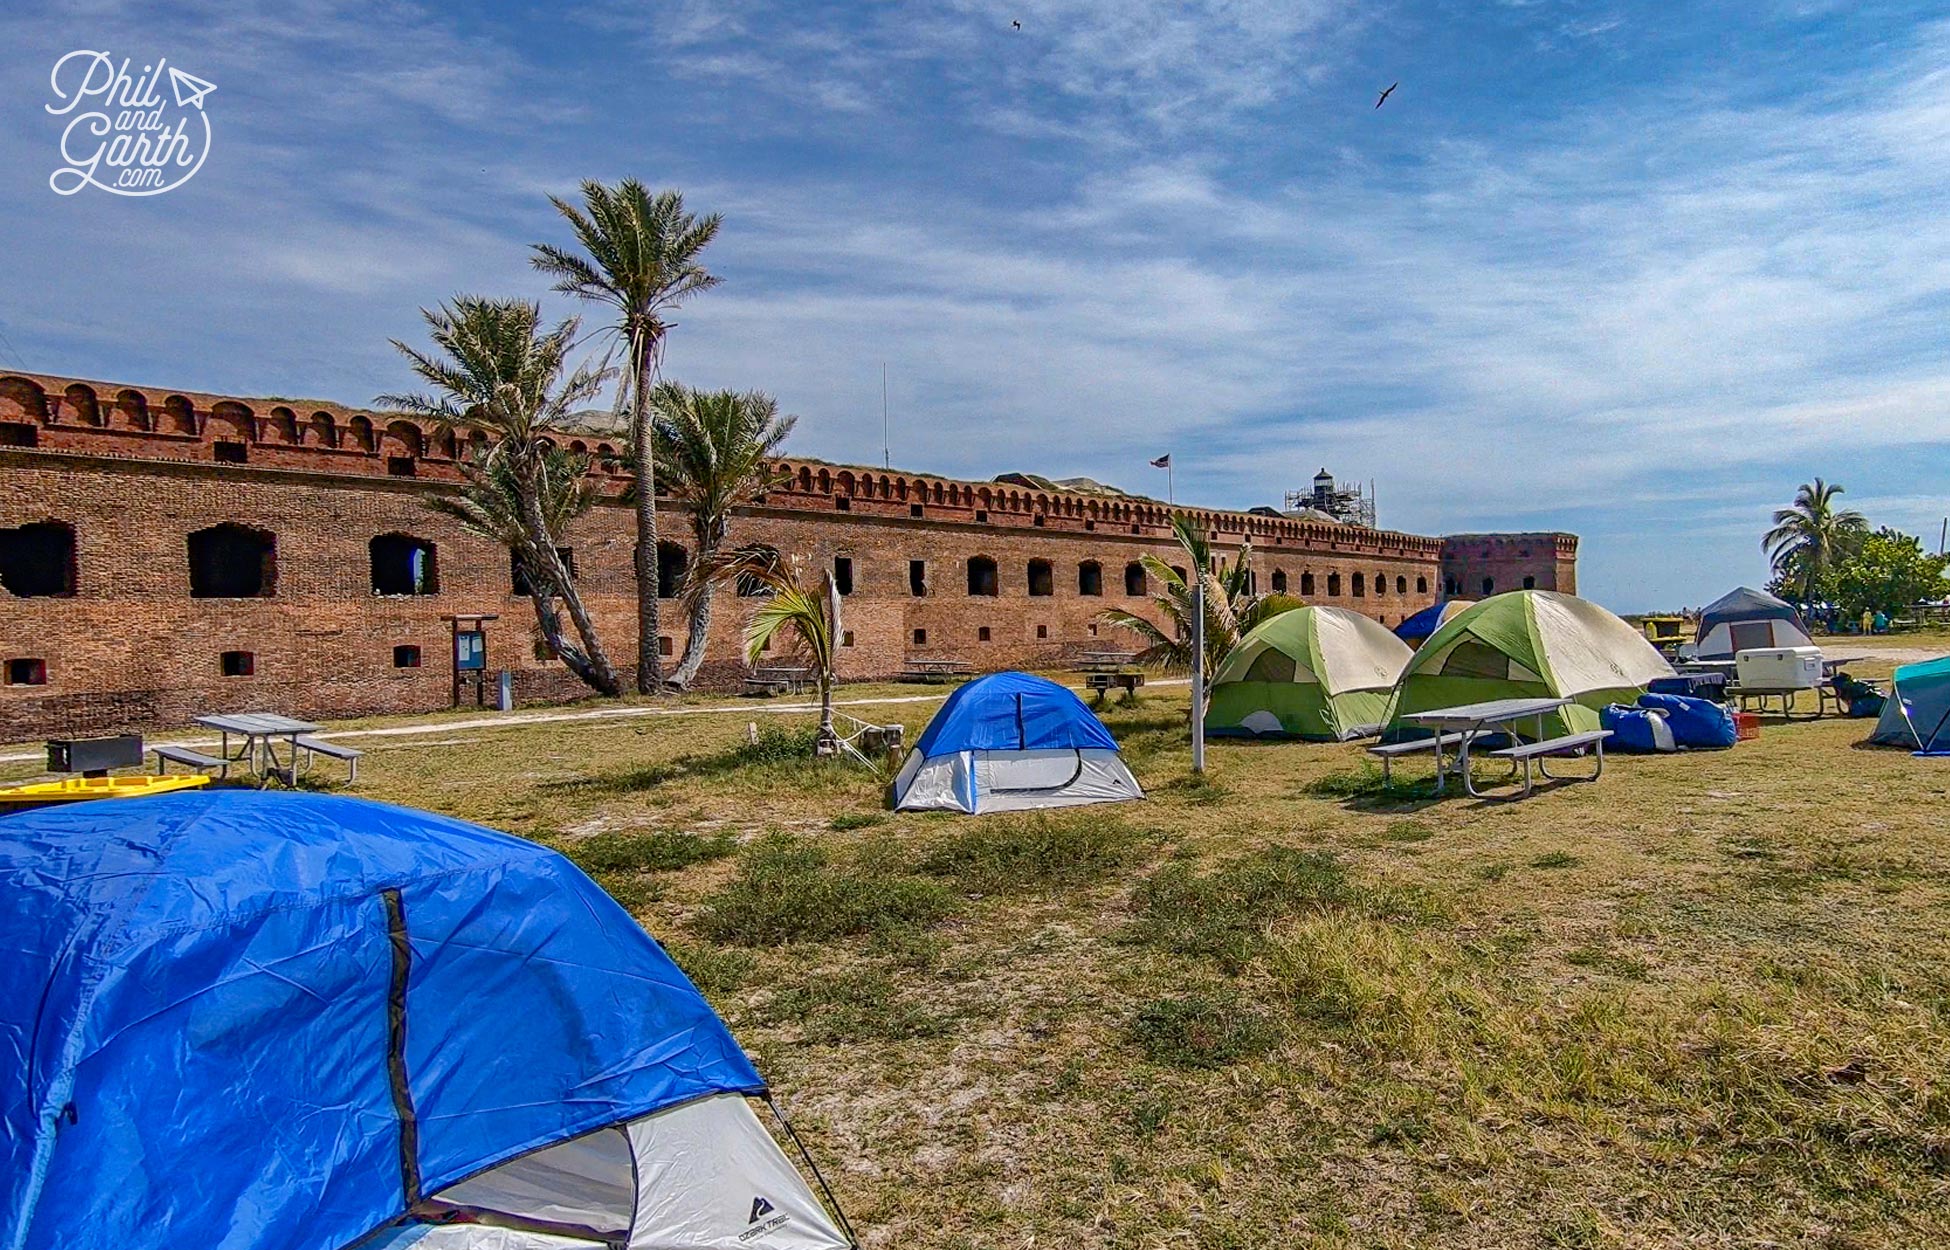 If you fancy camping at Fort Jefferson you might need to book 12 months in advance!